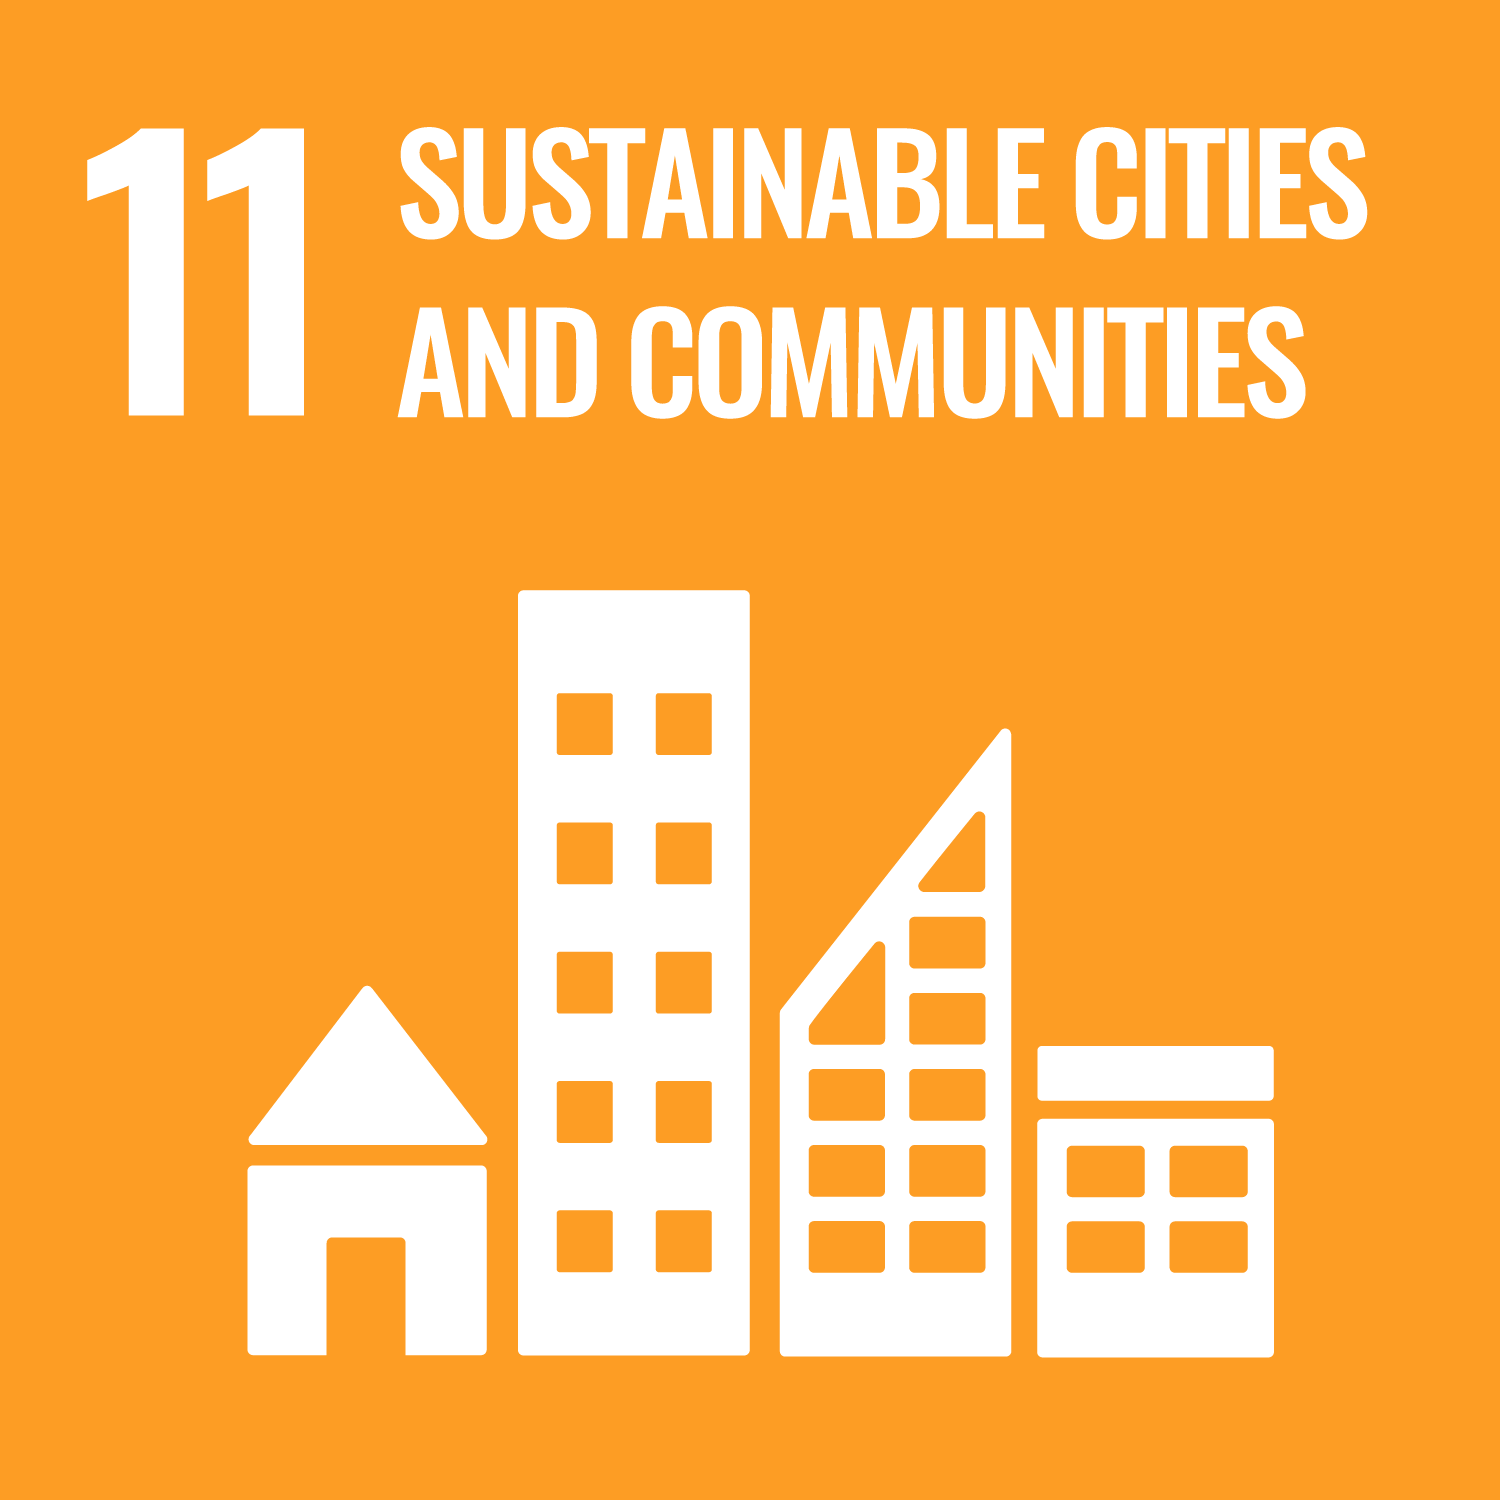 Sustainble cities and communities